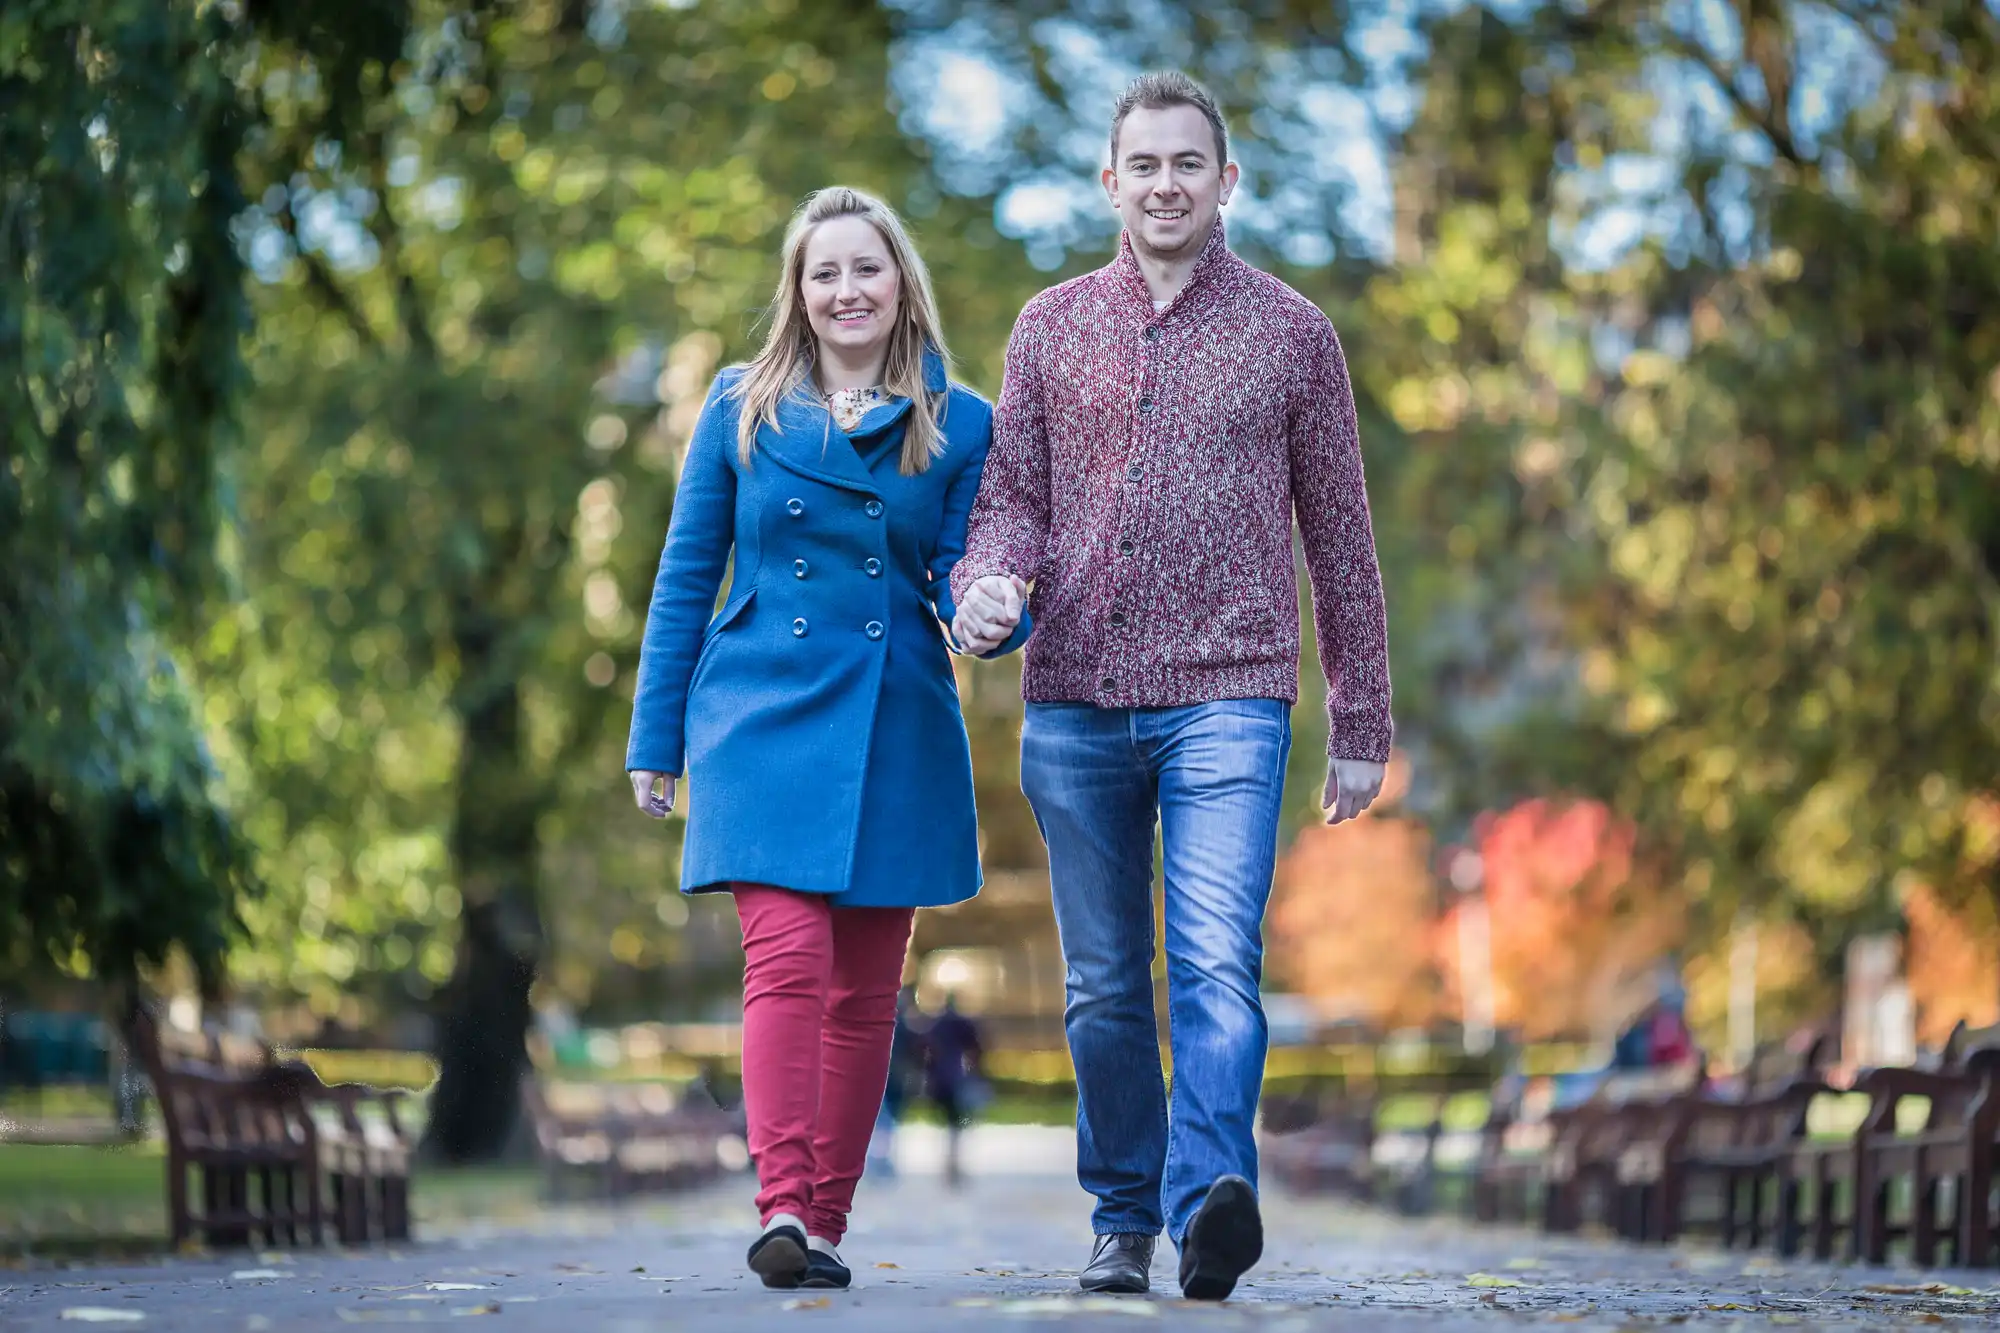 A couple holding hands and smiling while walking down a tree-lined park path in autumn.